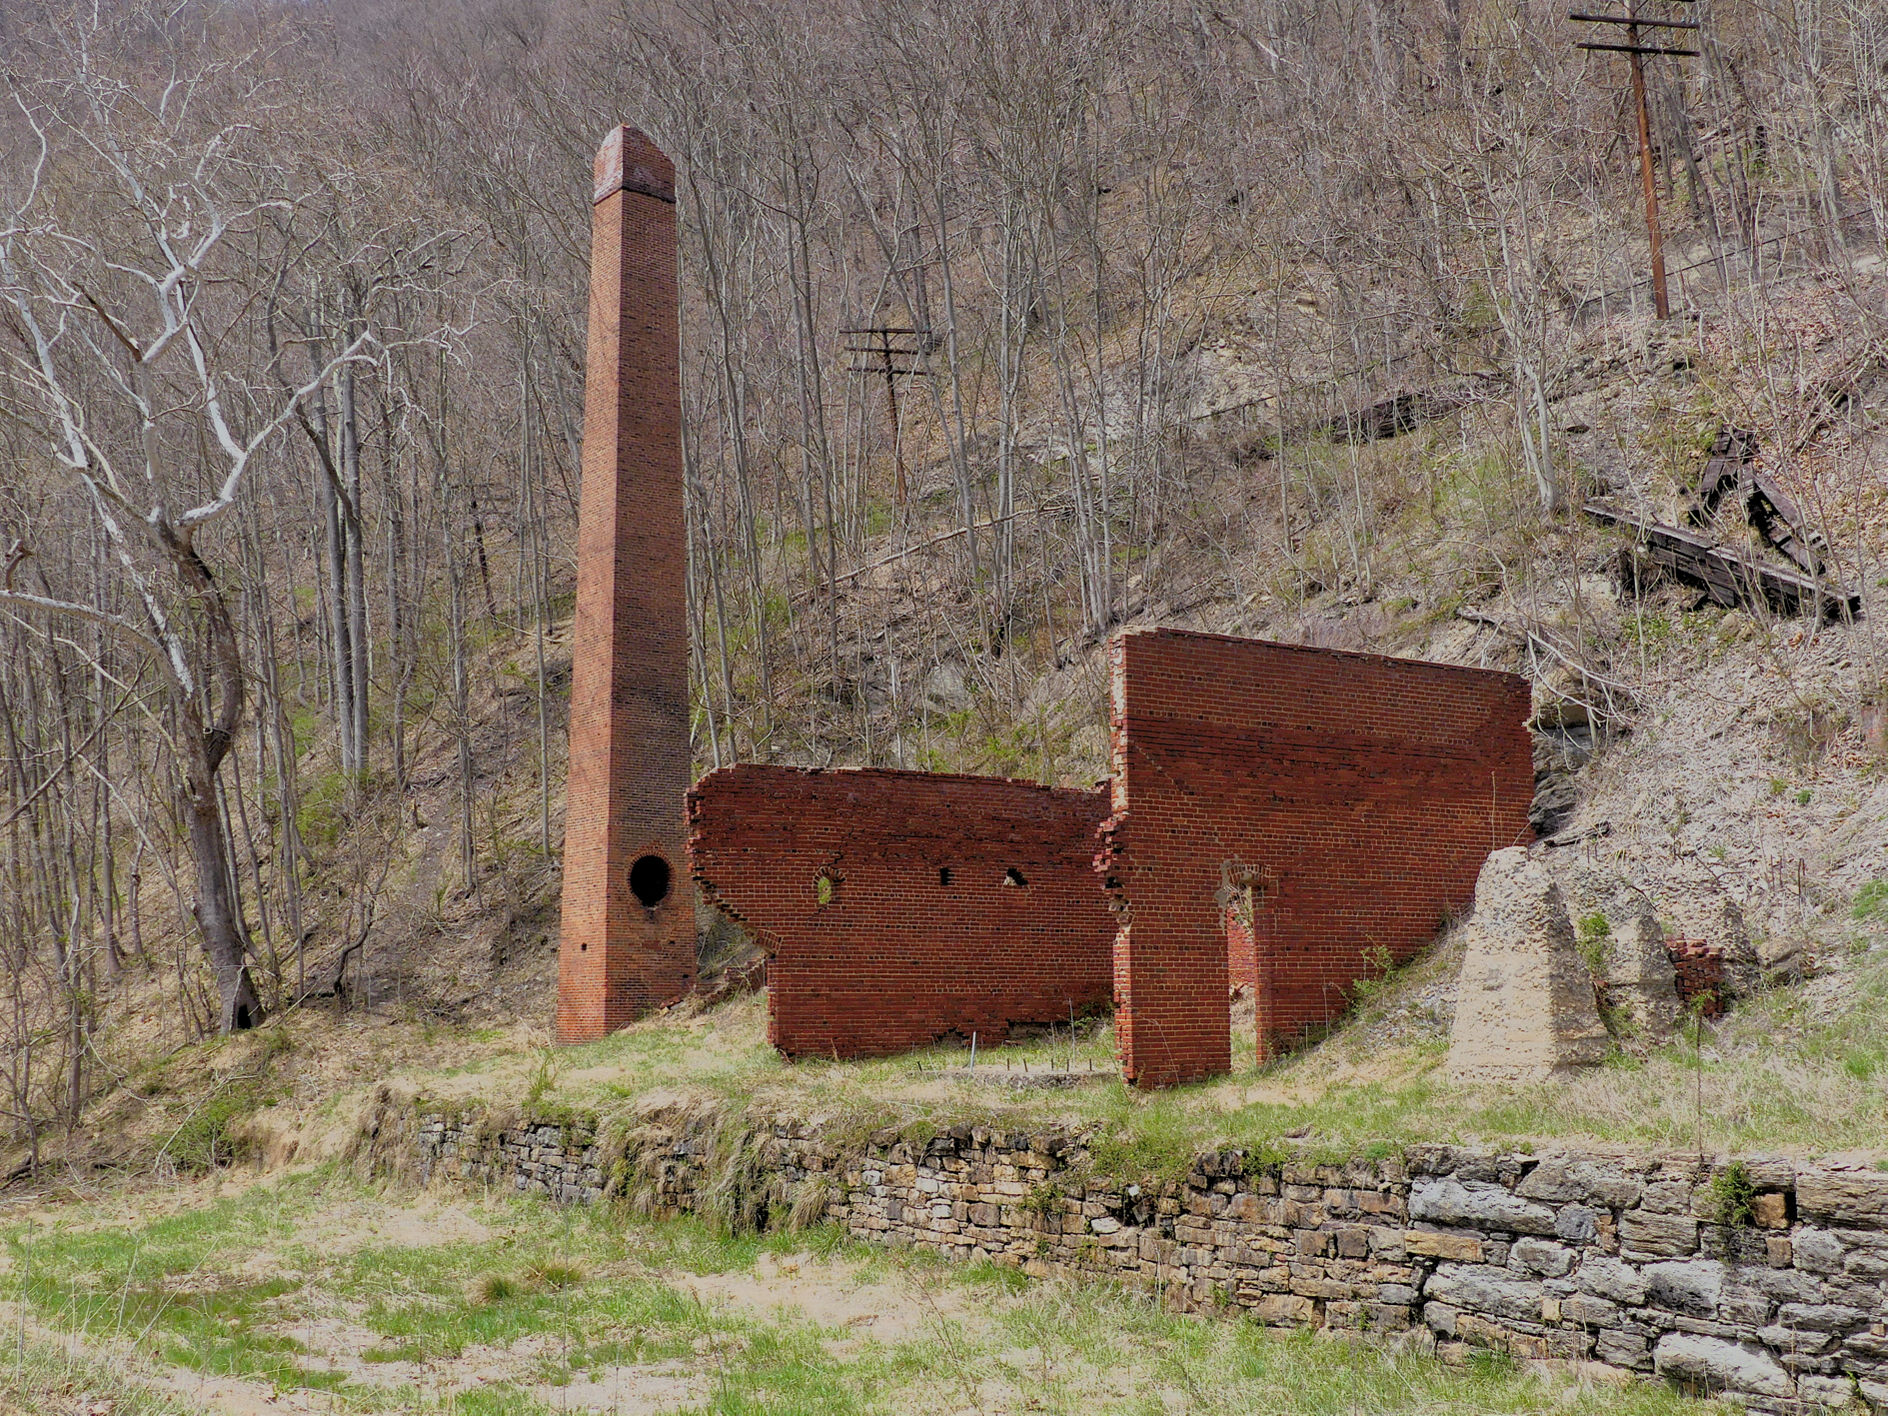 3/4 view of 19th century cement mill ruins. Furnace tower and two structural walls atop a walled embankment at the bottom of steep hill below railroad tracks.